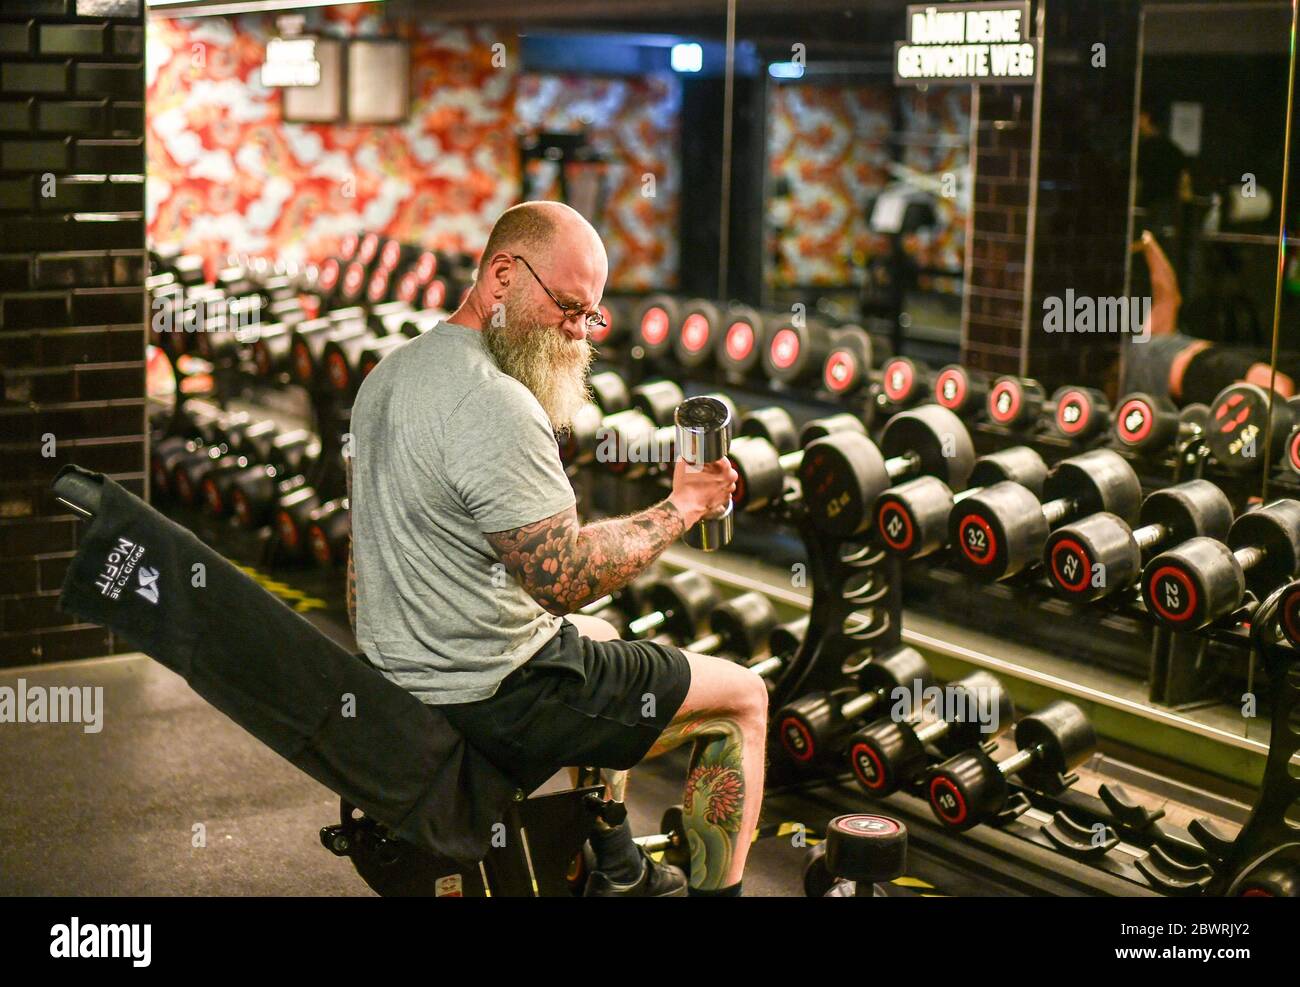 Berlin, Germany. 02nd June, 2020. A man trains with dumbbells at the John  Reed Fitness Music Club in Prenzlauer Berg. Credit: Jens  Kalaene/dpa-Zentralbild/dpa/Alamy Live News Stock Photo - Alamy